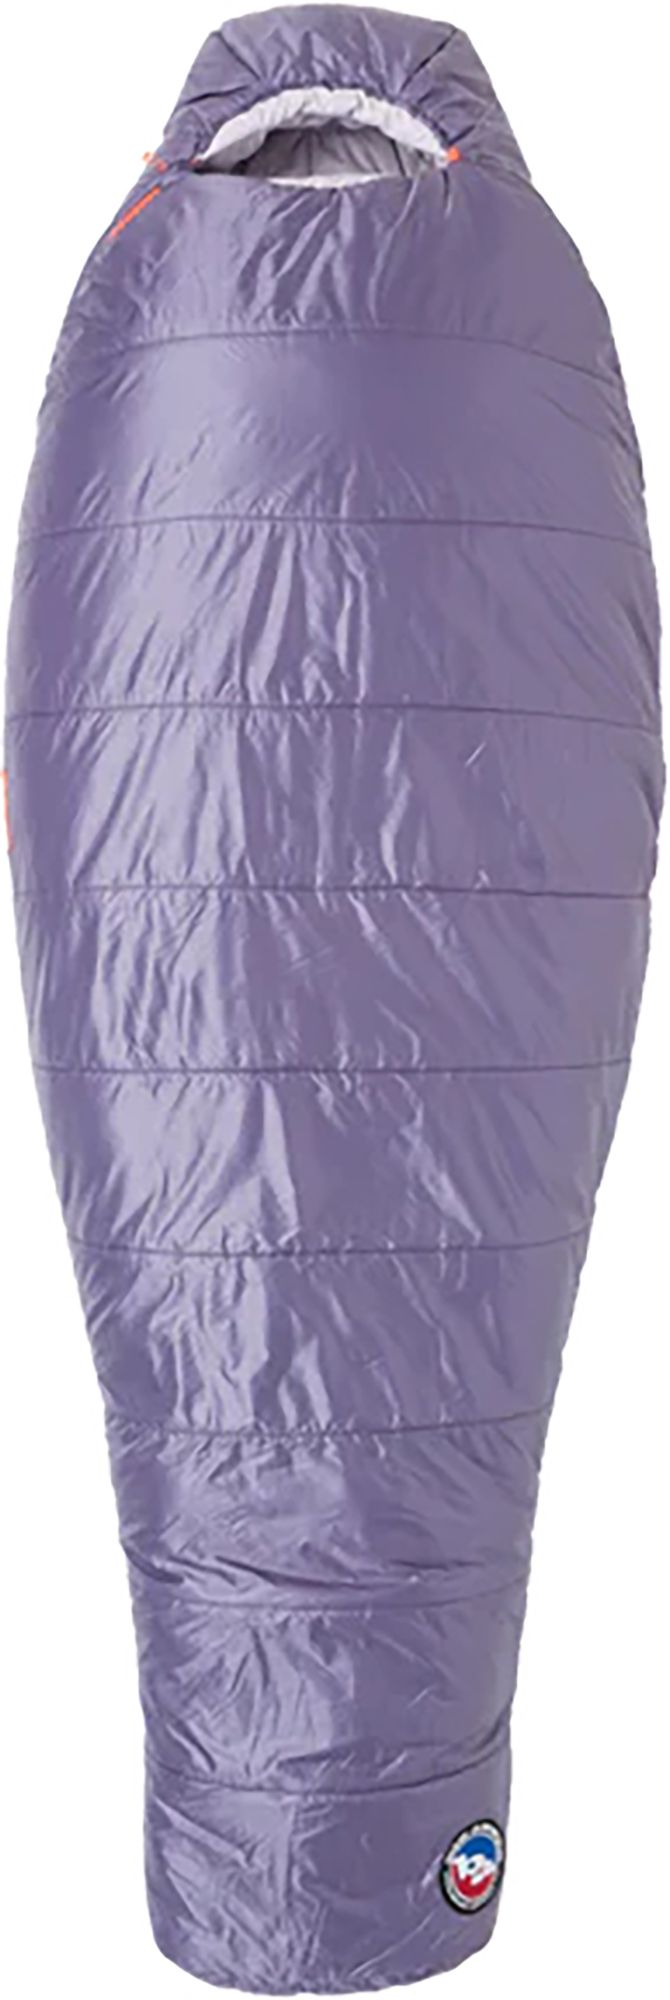 Photos - Suitcase / Backpack Cover Big Agnes Women's Anthracite 20° Mummy Sleeping Bag, Regular, Lavender 24T 